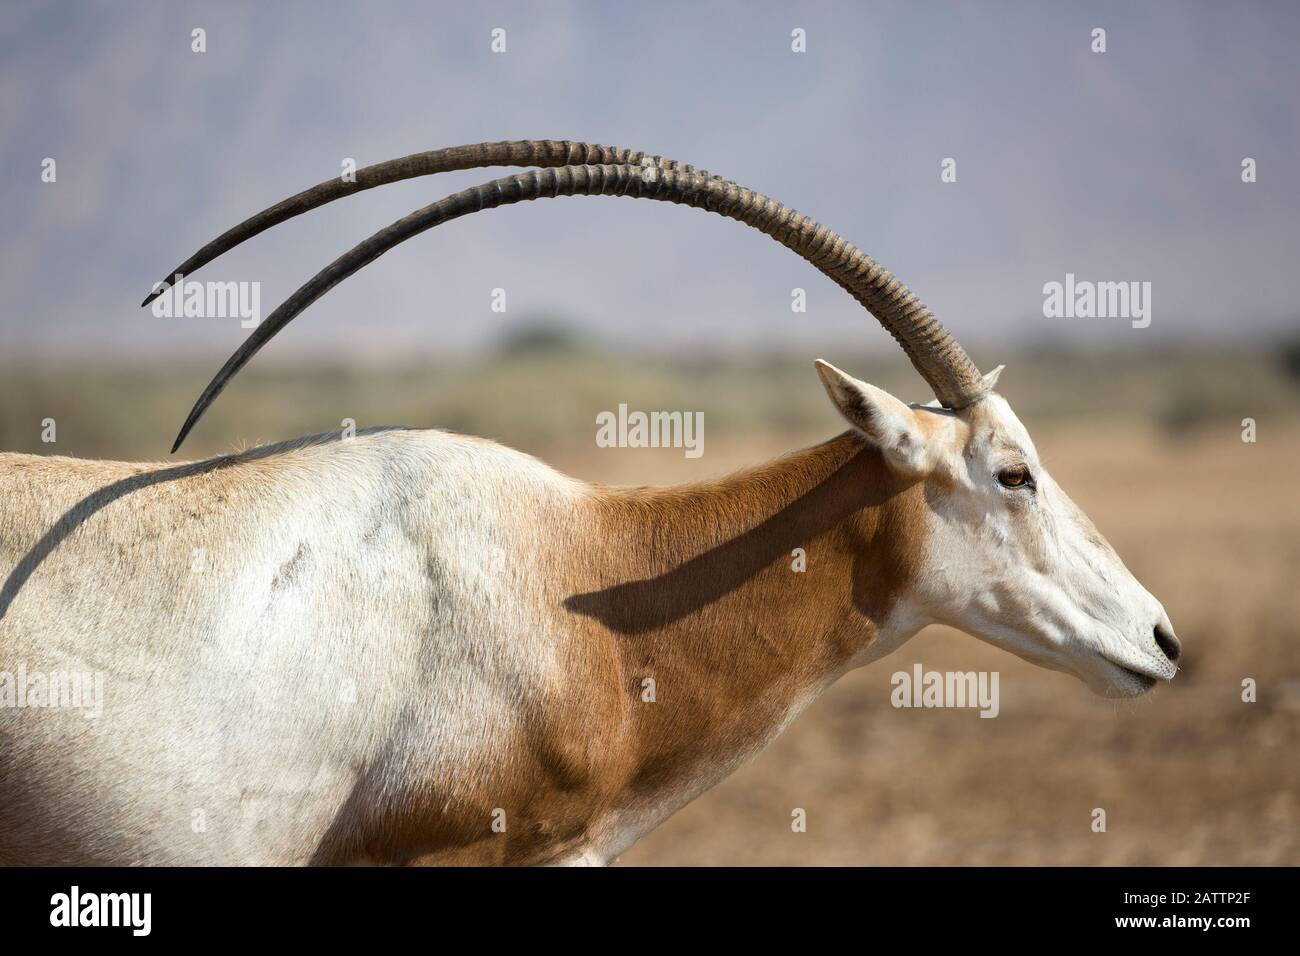 Scimitar-horned oryx, an endangered species that is extinct in the wild, on a breeding and reacclimation center in the Negev desert. Oryx dammah. Stock Photo